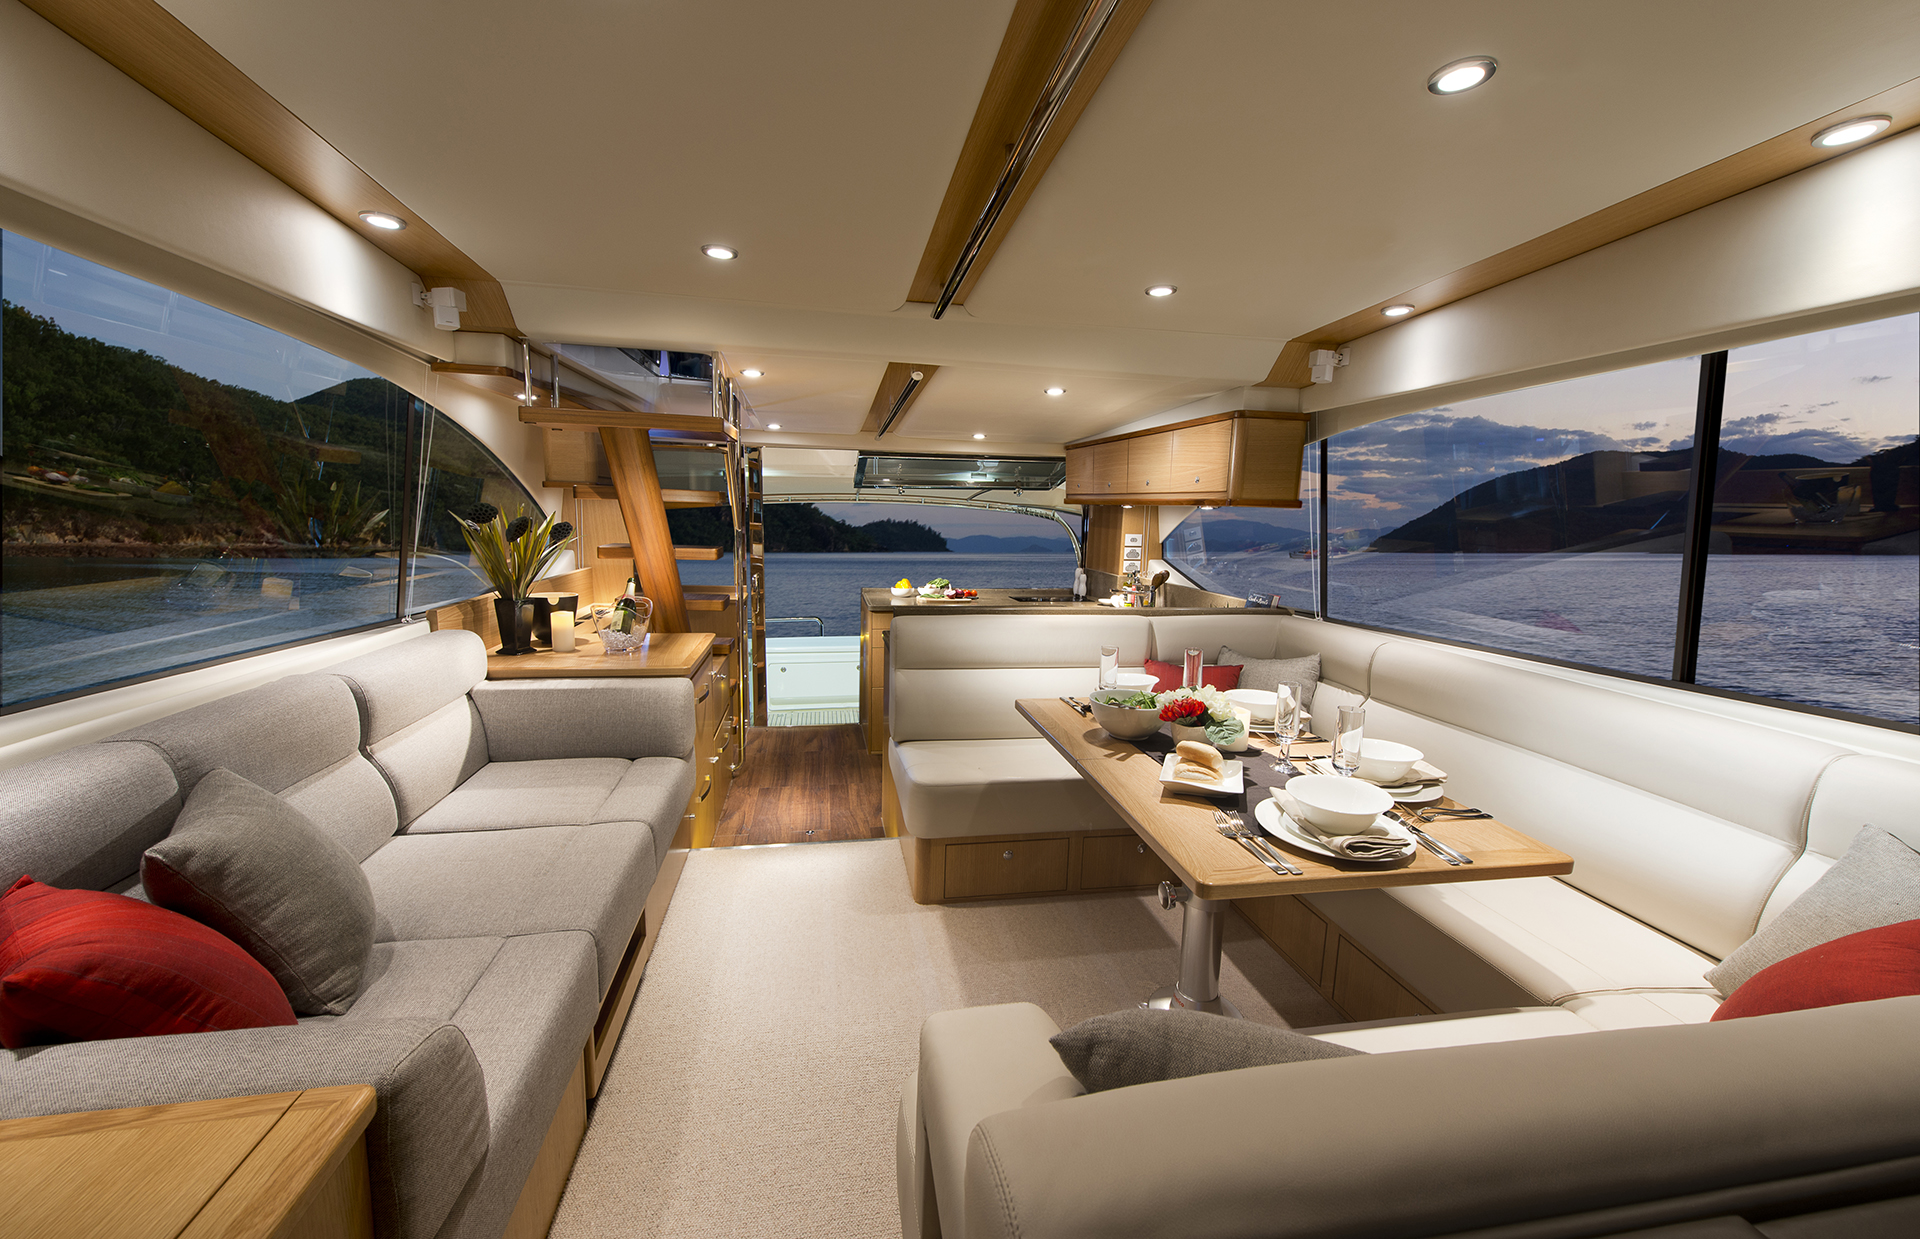 Opening side windows and a massive front windscreen enhance natural light and fresh air in the new 52 Enclosed Flybridge spacious and luxurious saloon